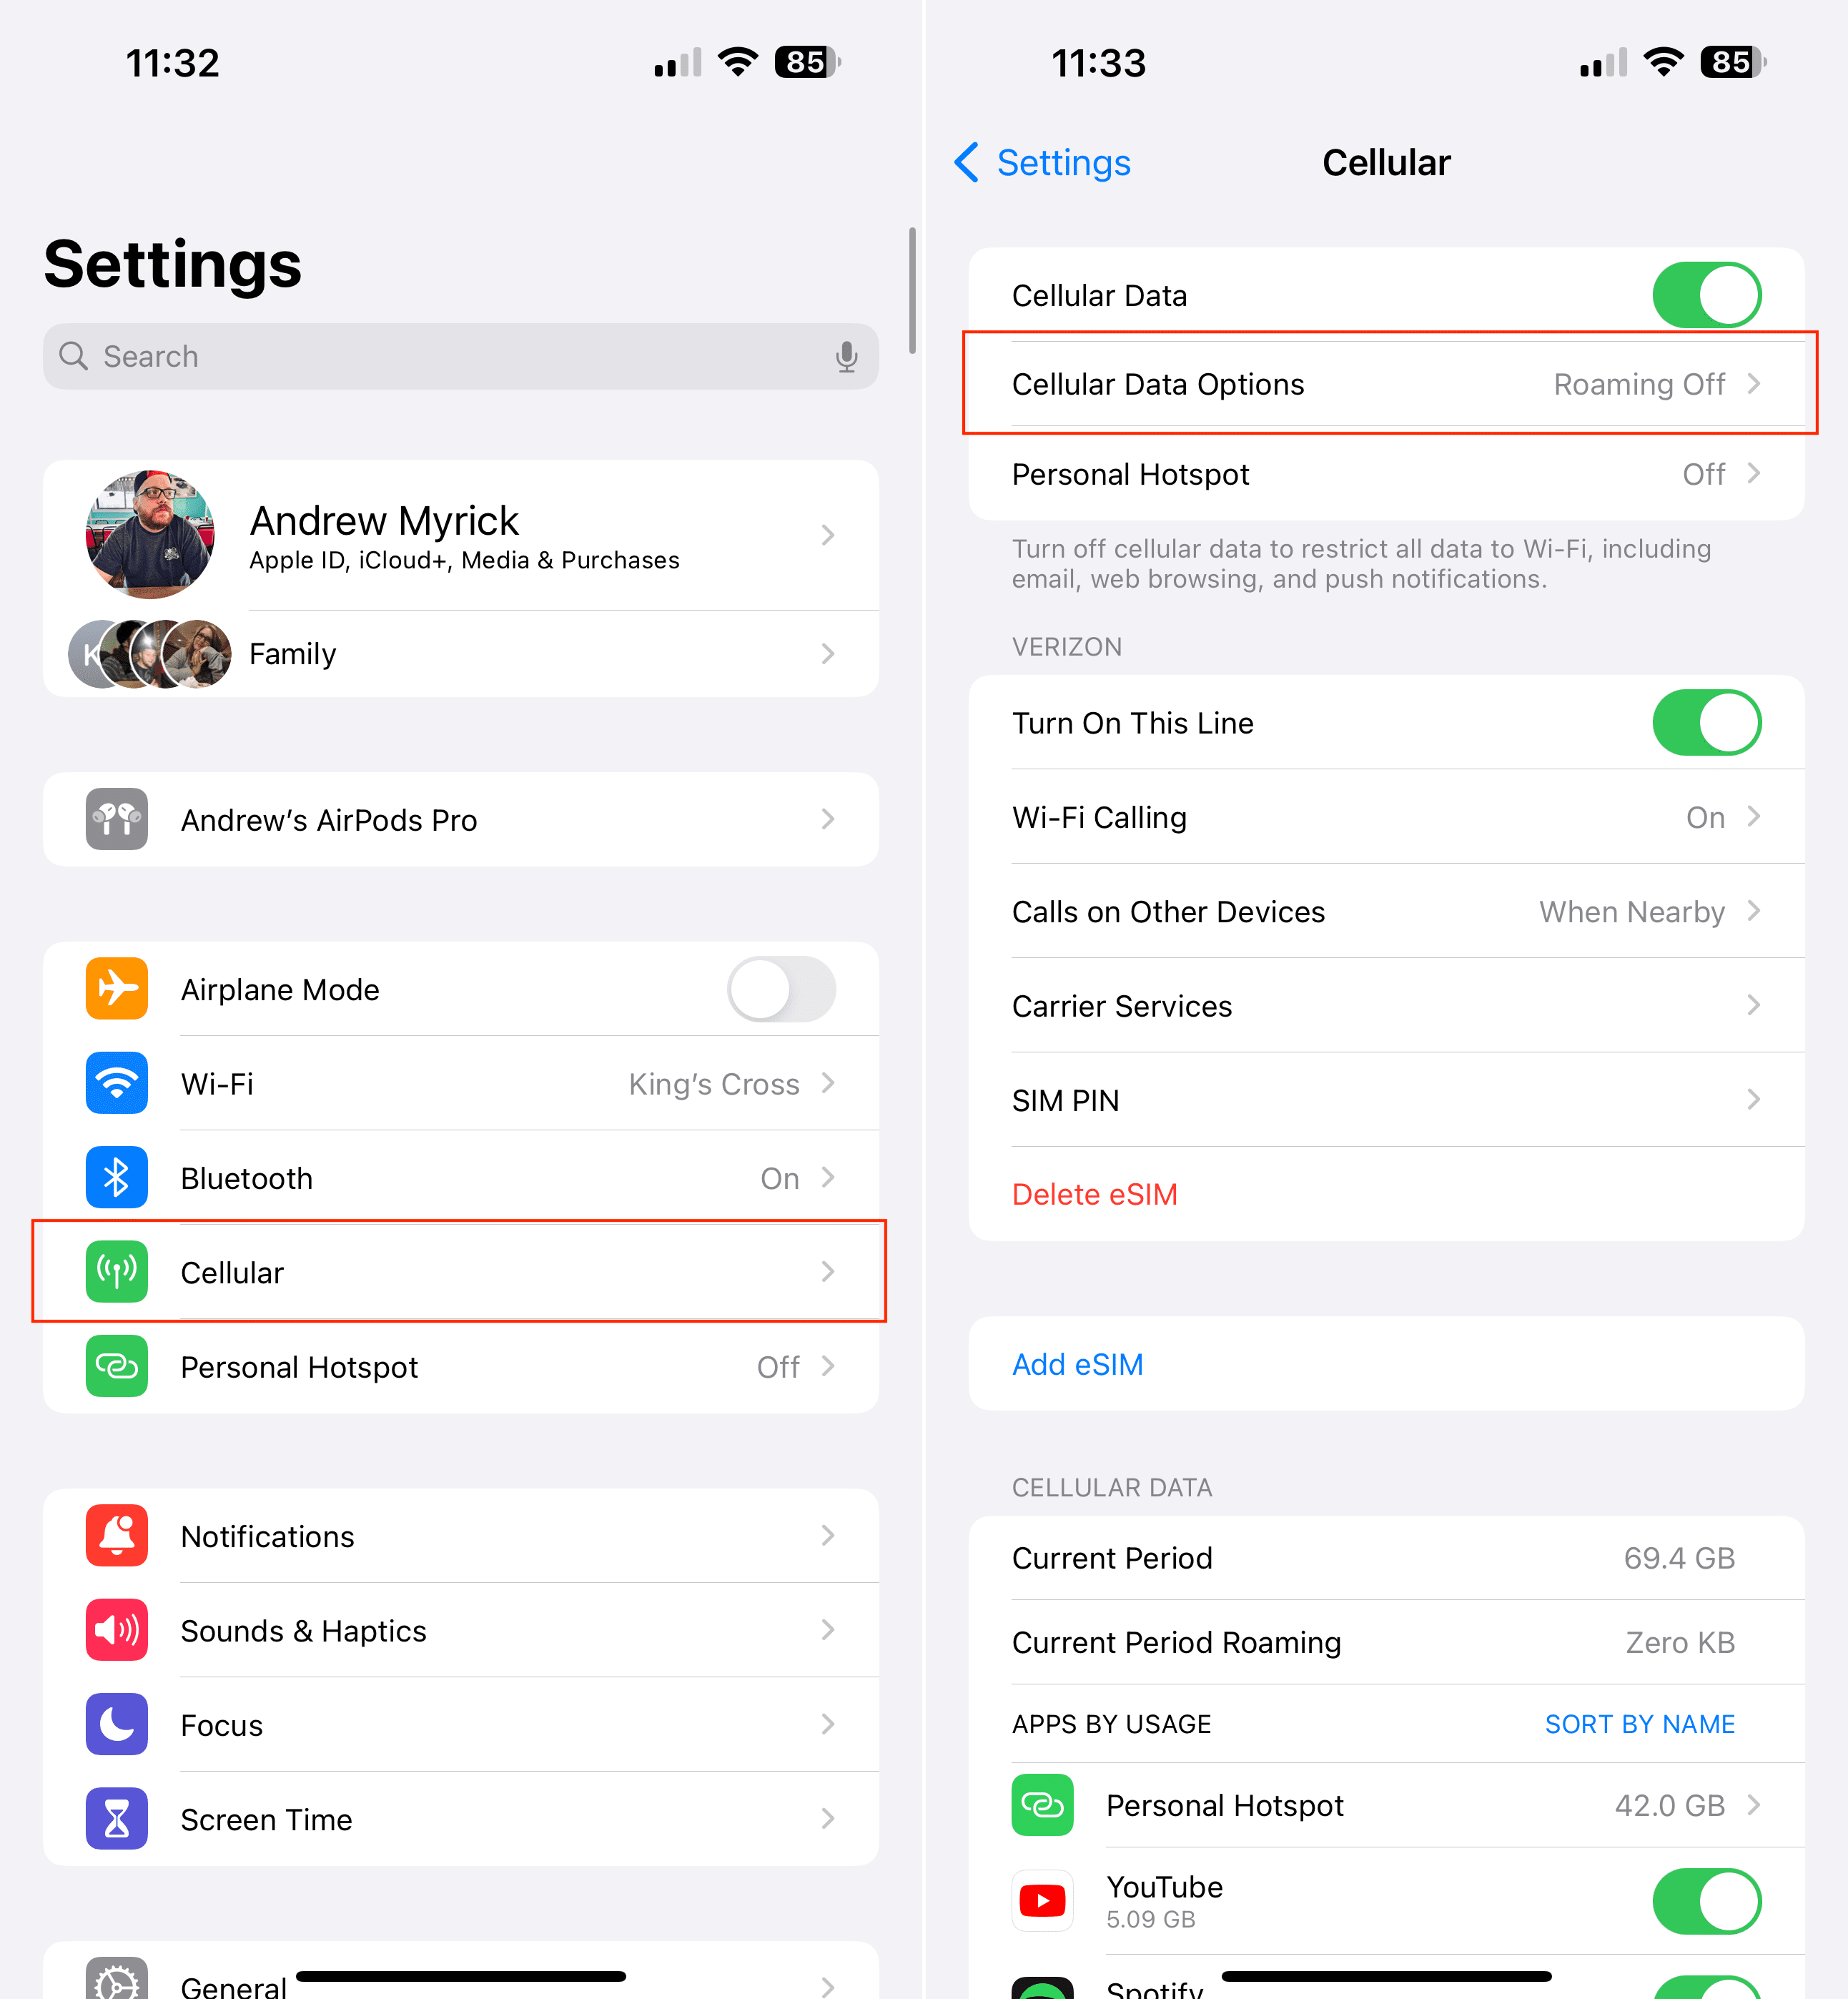 How to extend your iPhone battery life - Turn Off 5G